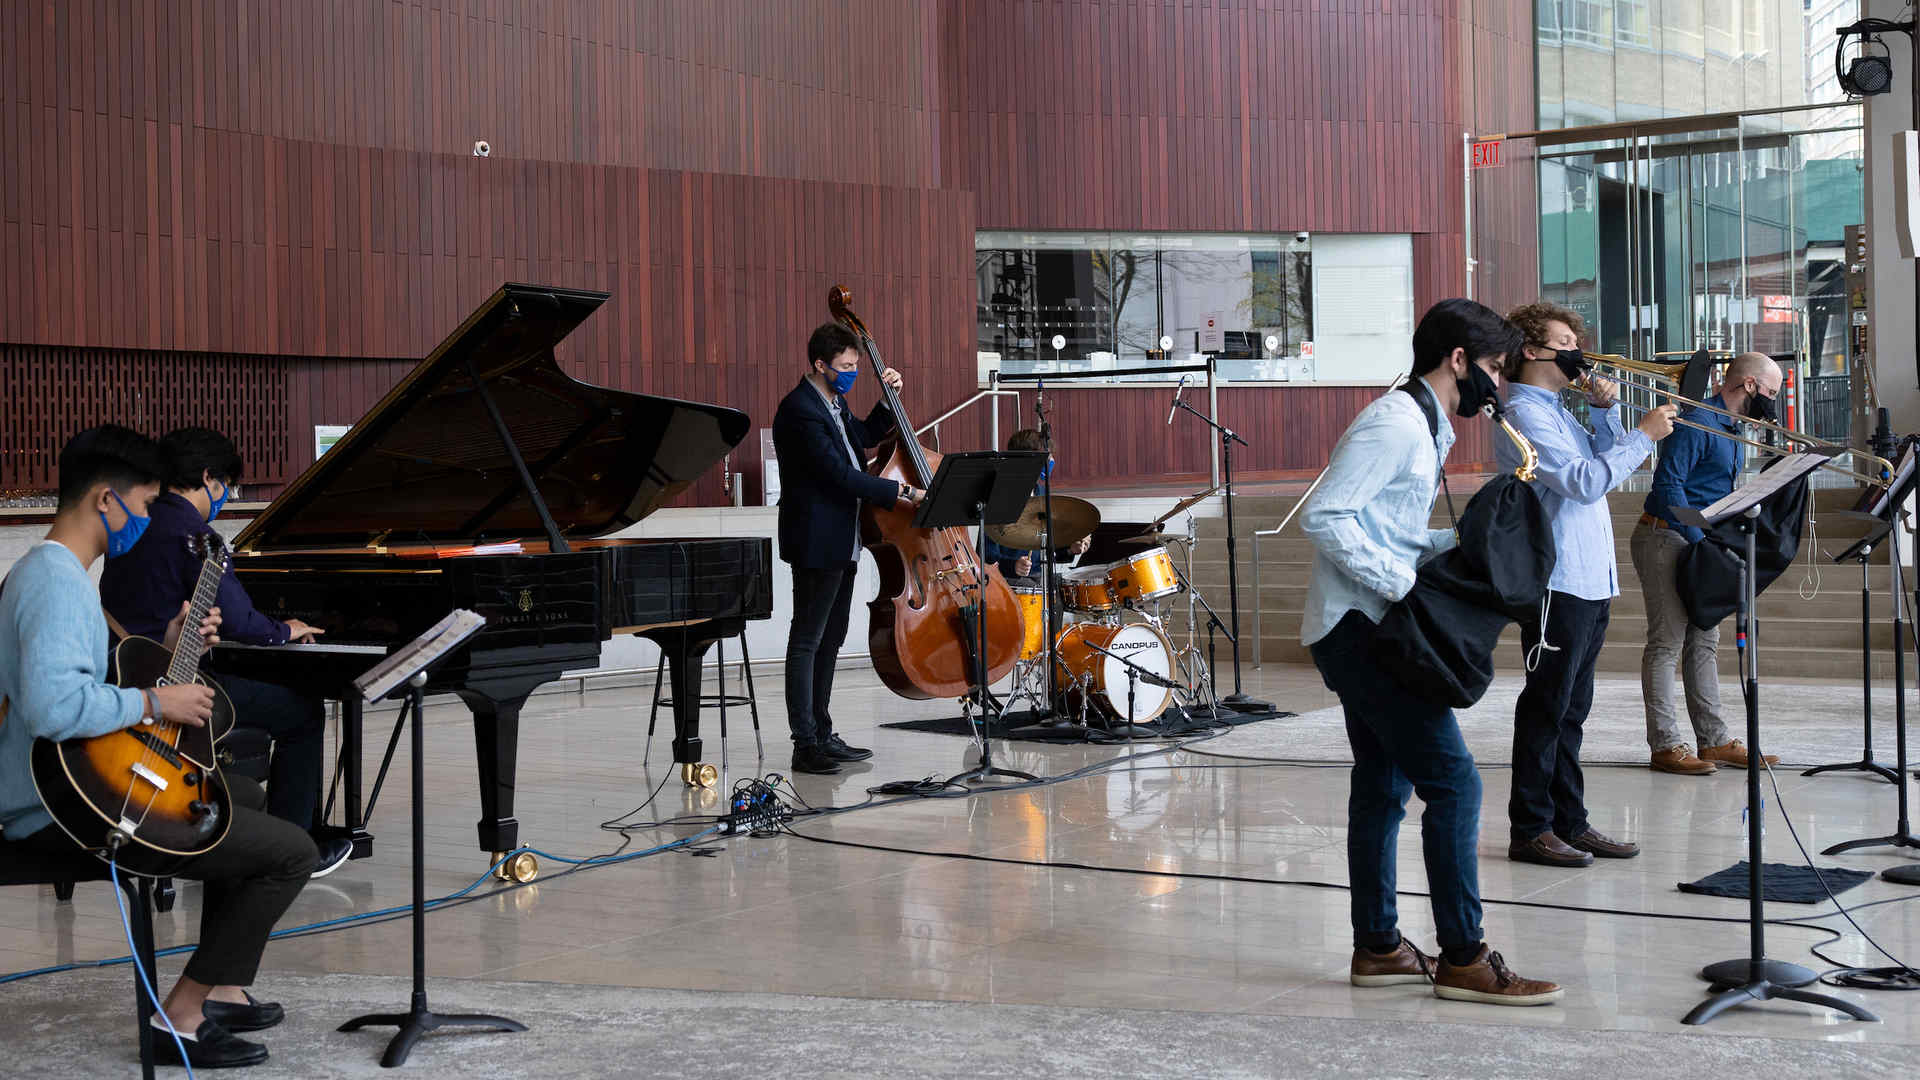 A combo of seven jazz musicians is playing in the lobby at Alice Tully Hall and visible on the floor are wires for recording and sound amplification equipment—indicating that this is a live performance